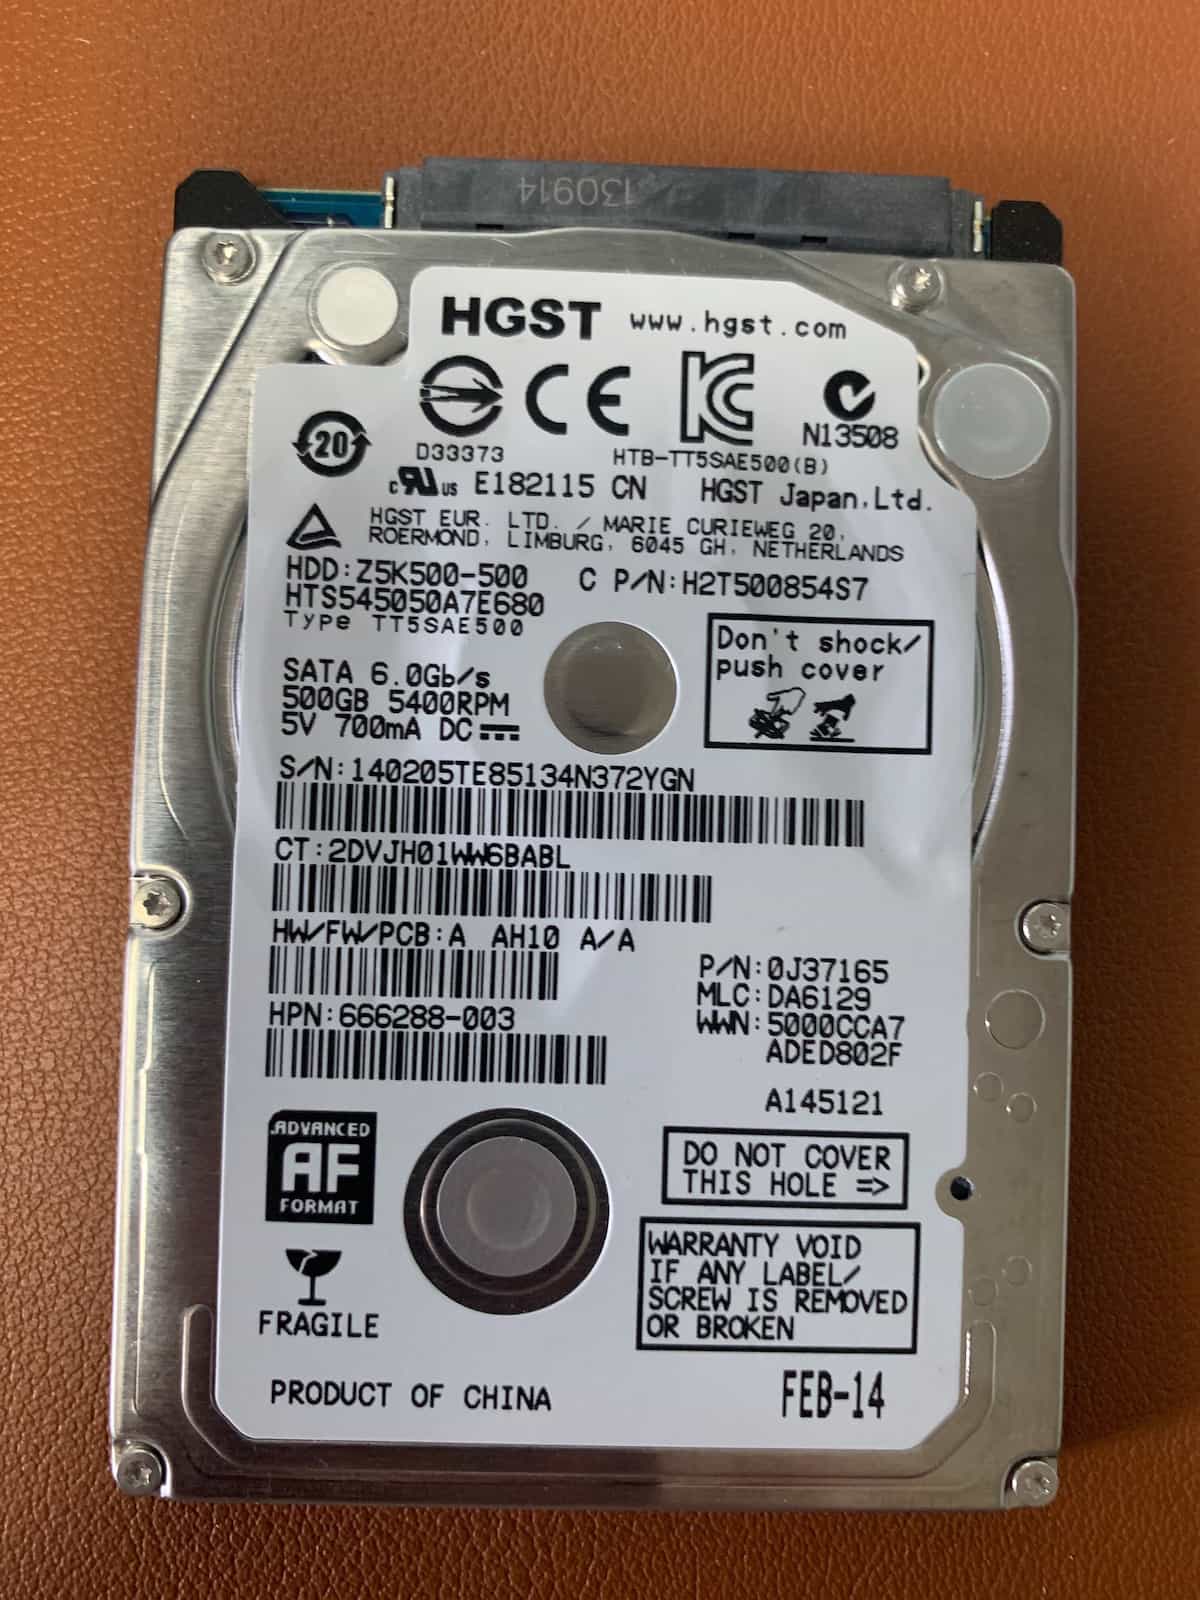 HGST 500GB Laptop drive that just stopped working